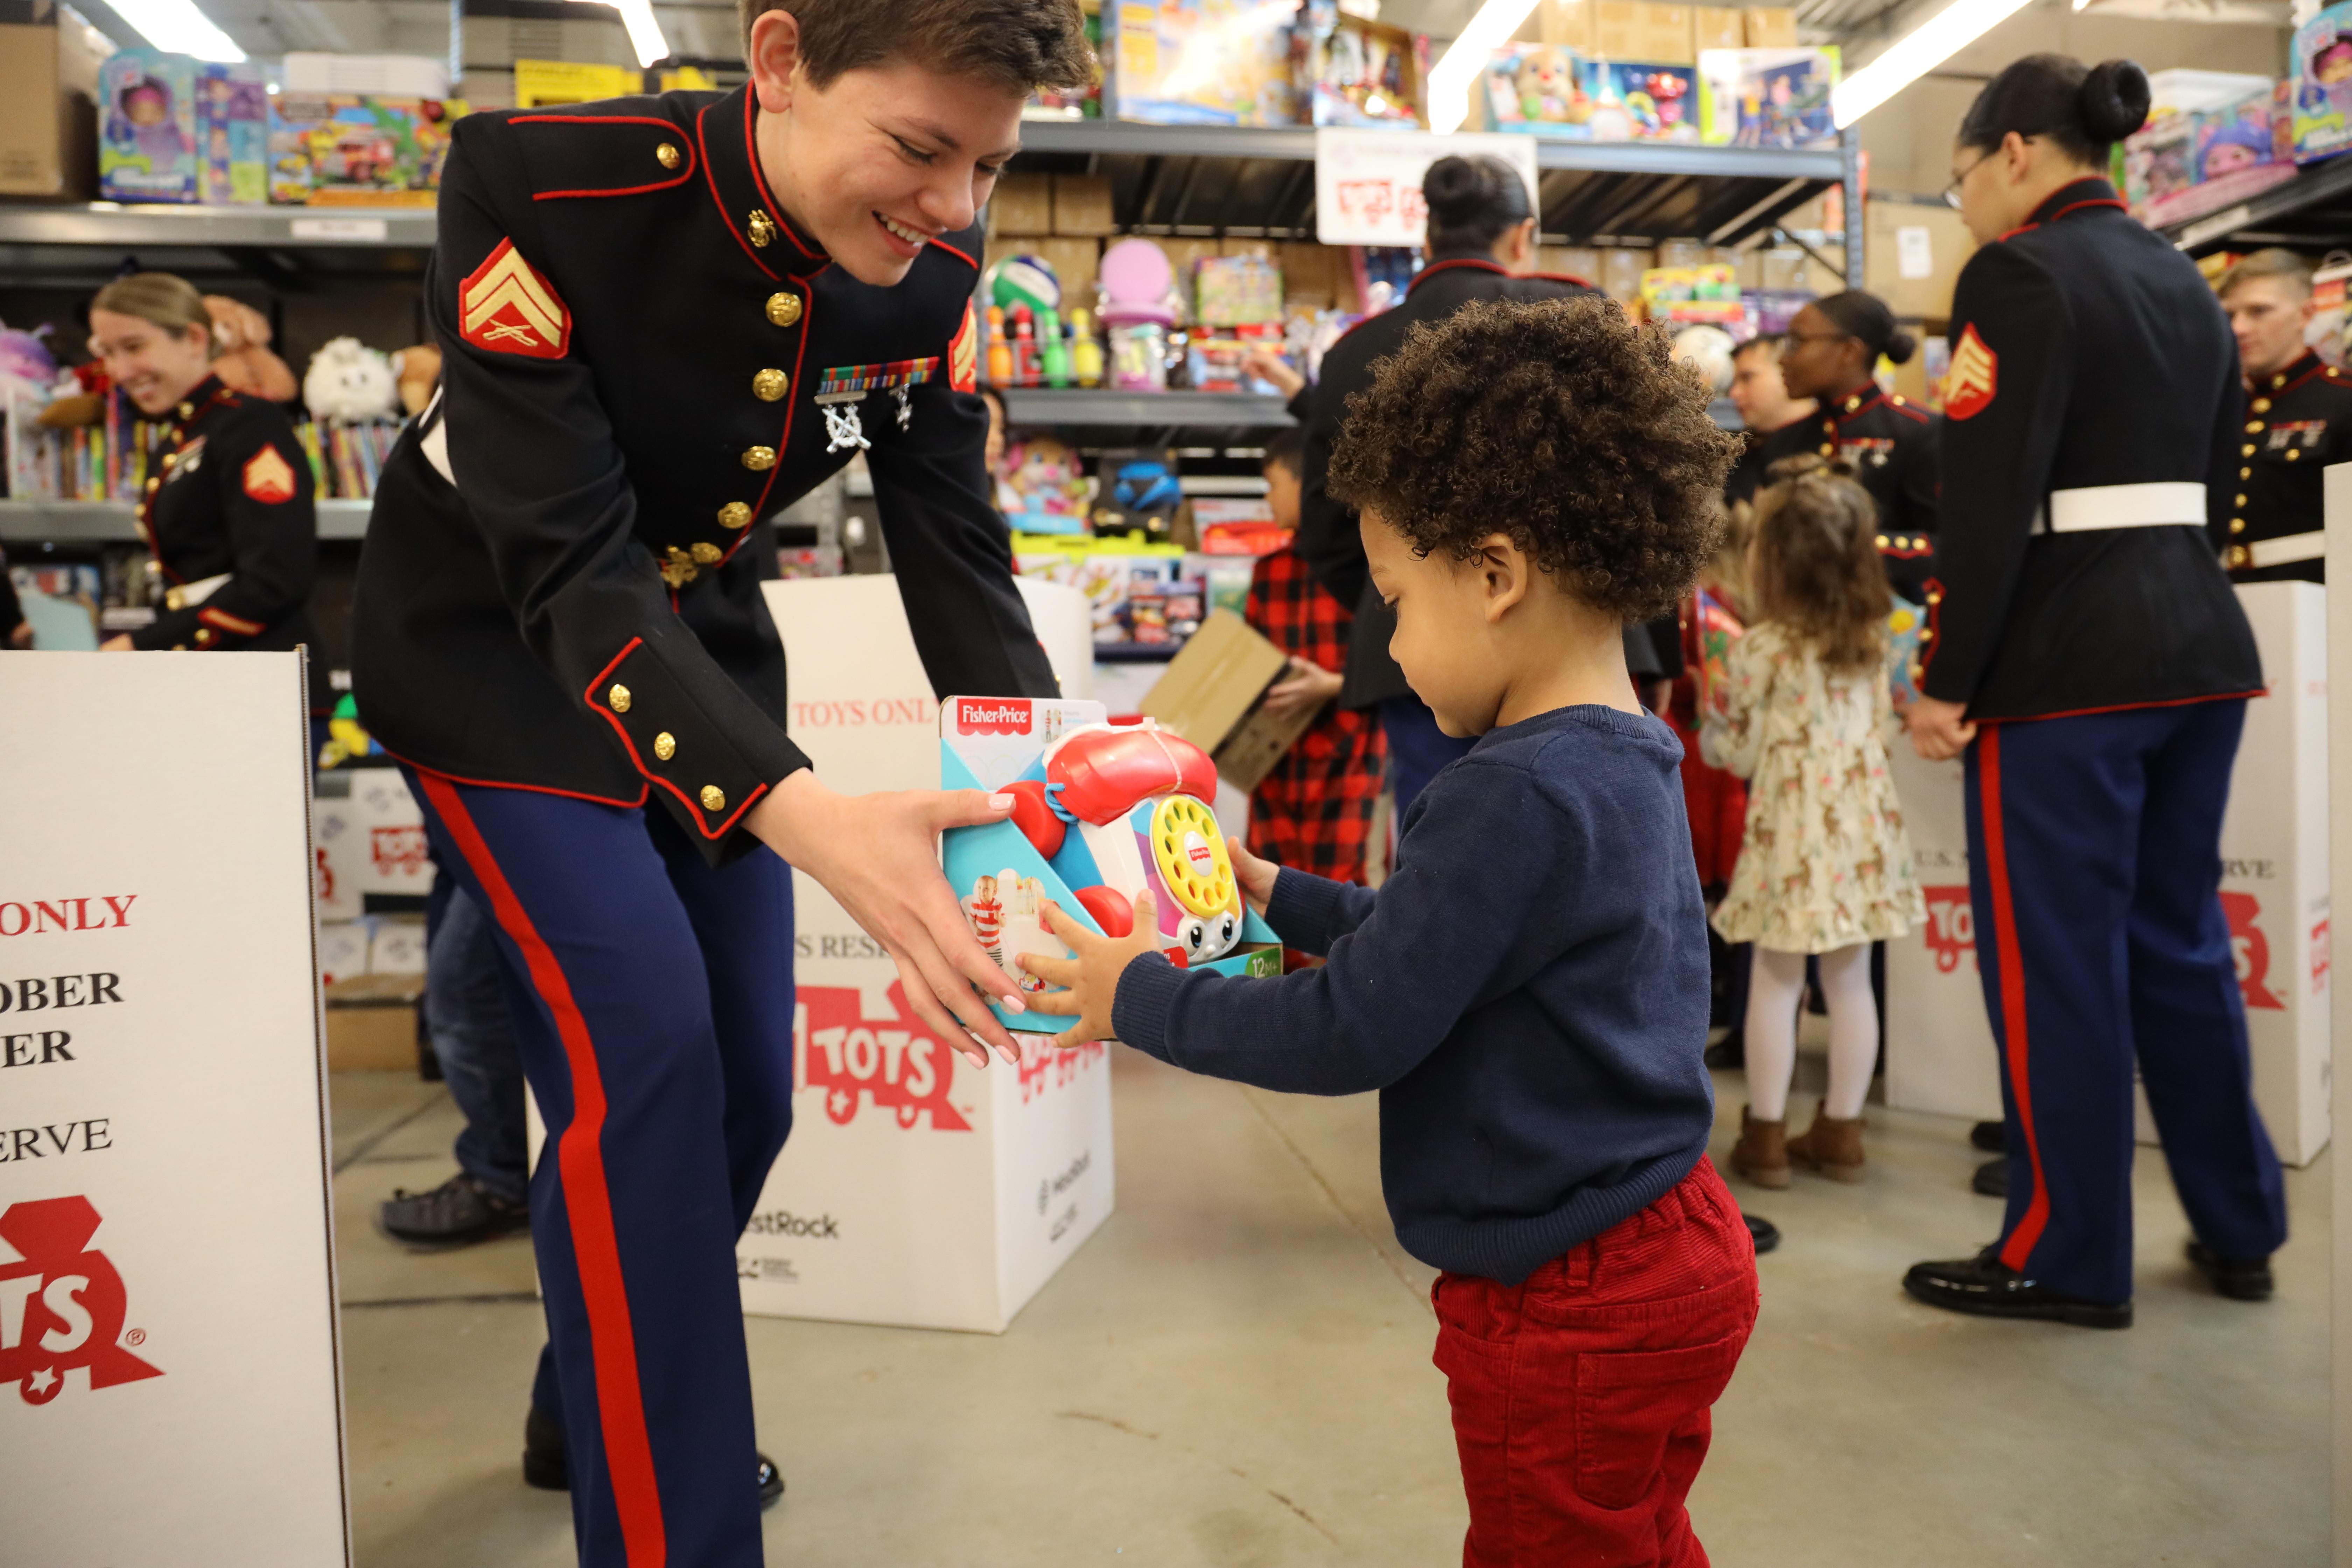 Donate to Toys for Tots on Giving TOYSday